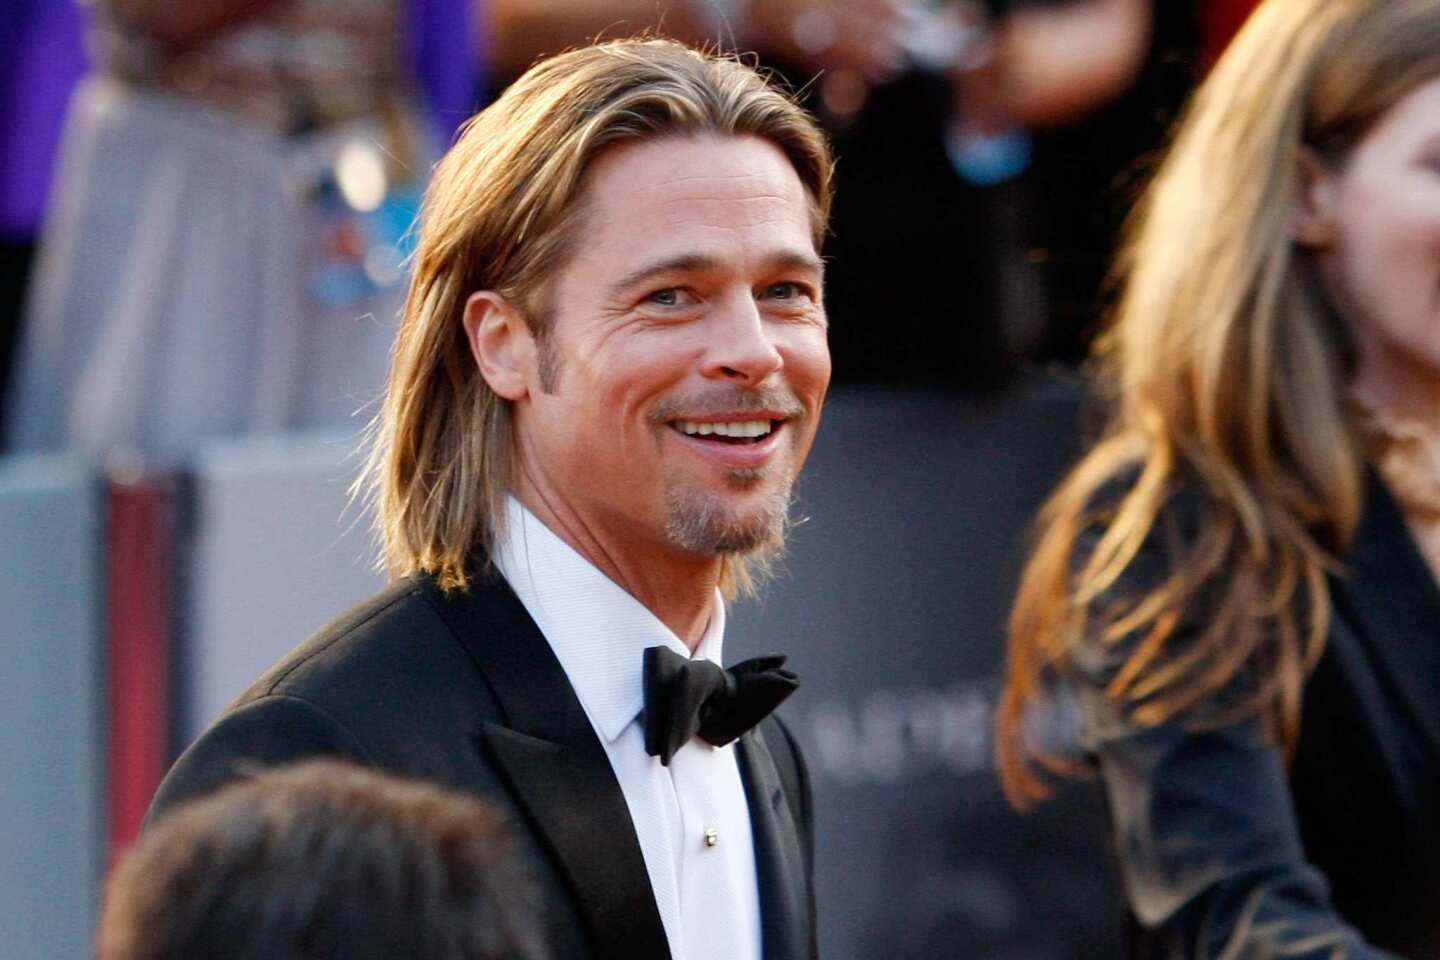 Brad Pitt is showing his support of gay marriage by joining the upcoming reading of the play "8." Pitt will join stars like George Clooney for the reading, based on the court case Perry vs. Schwarzenegger, which sought to overturn Prop. 8, Saturday at the Wilshire Ebell Theatre. Pitt will peform the part of U.S. District Chief Judge Vaughn R. Walker from a script written by Oscar-winning screenwriter Dustin Lance Black ("Milk"). Fans who can't make it to the theater can watch a live stream on Youtube.